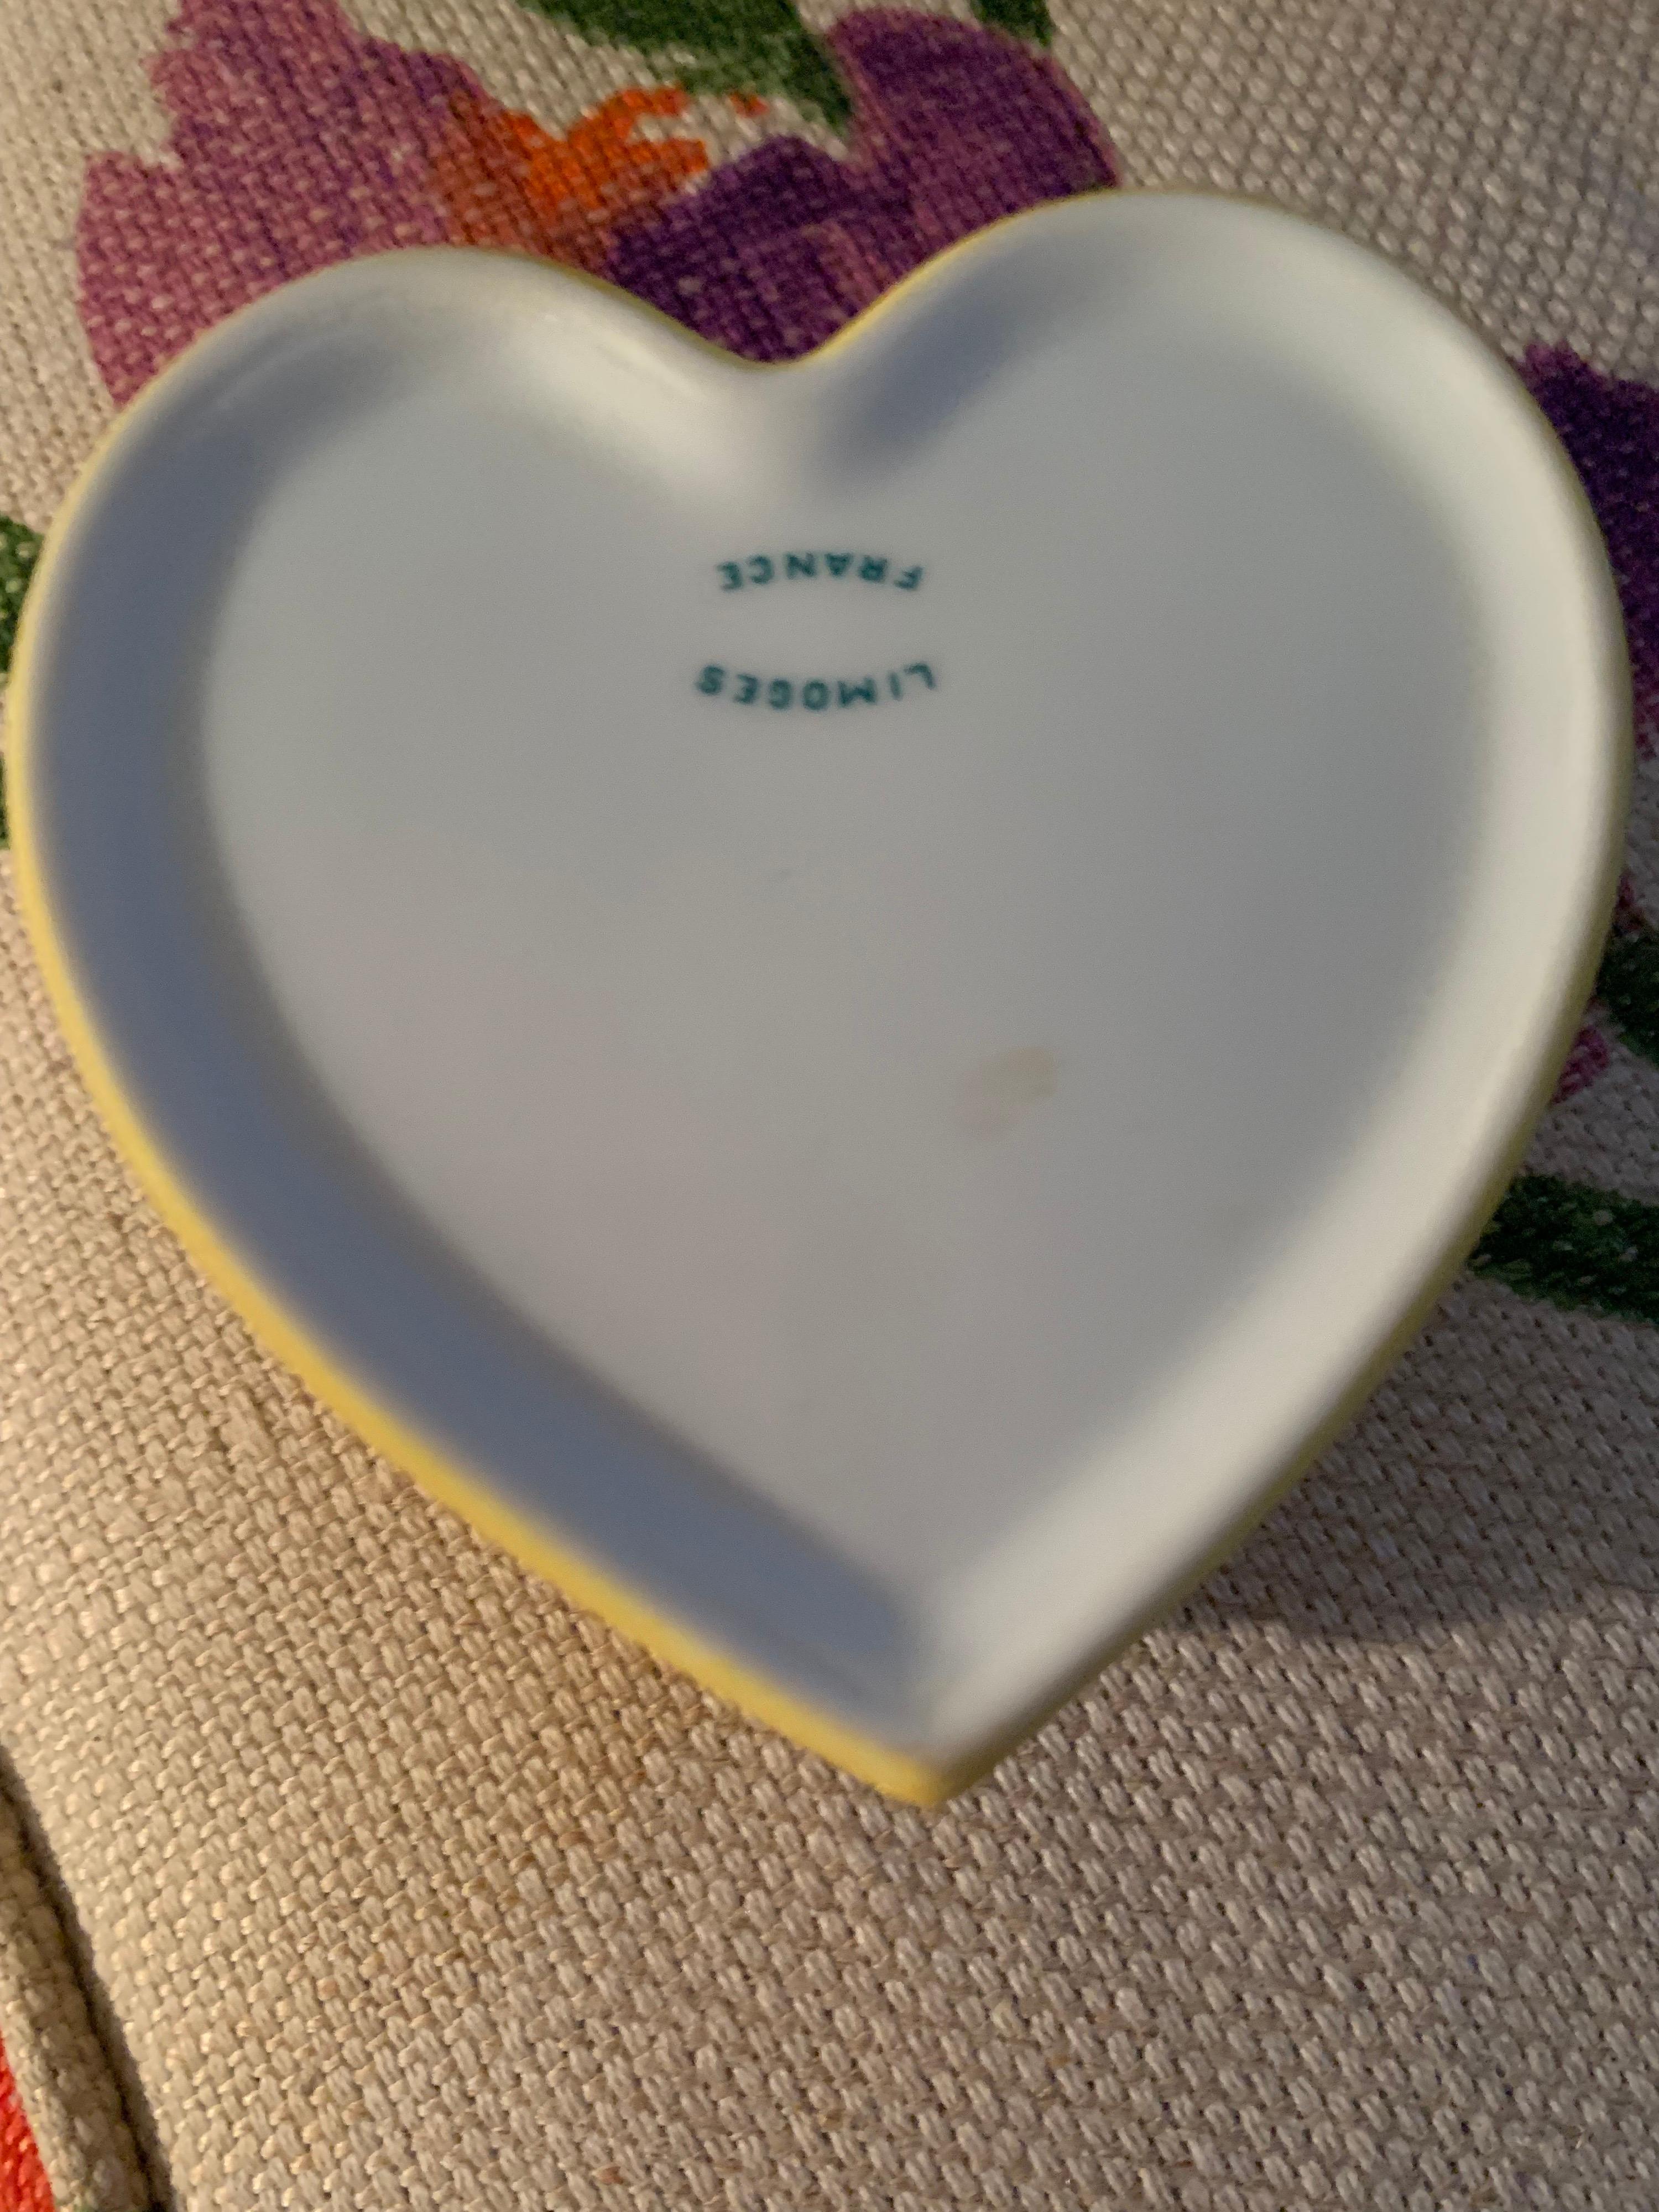 Limoges Porcelain Heart Trinket Box, Canary Yellow, French Porcelain Jewelry Box 7